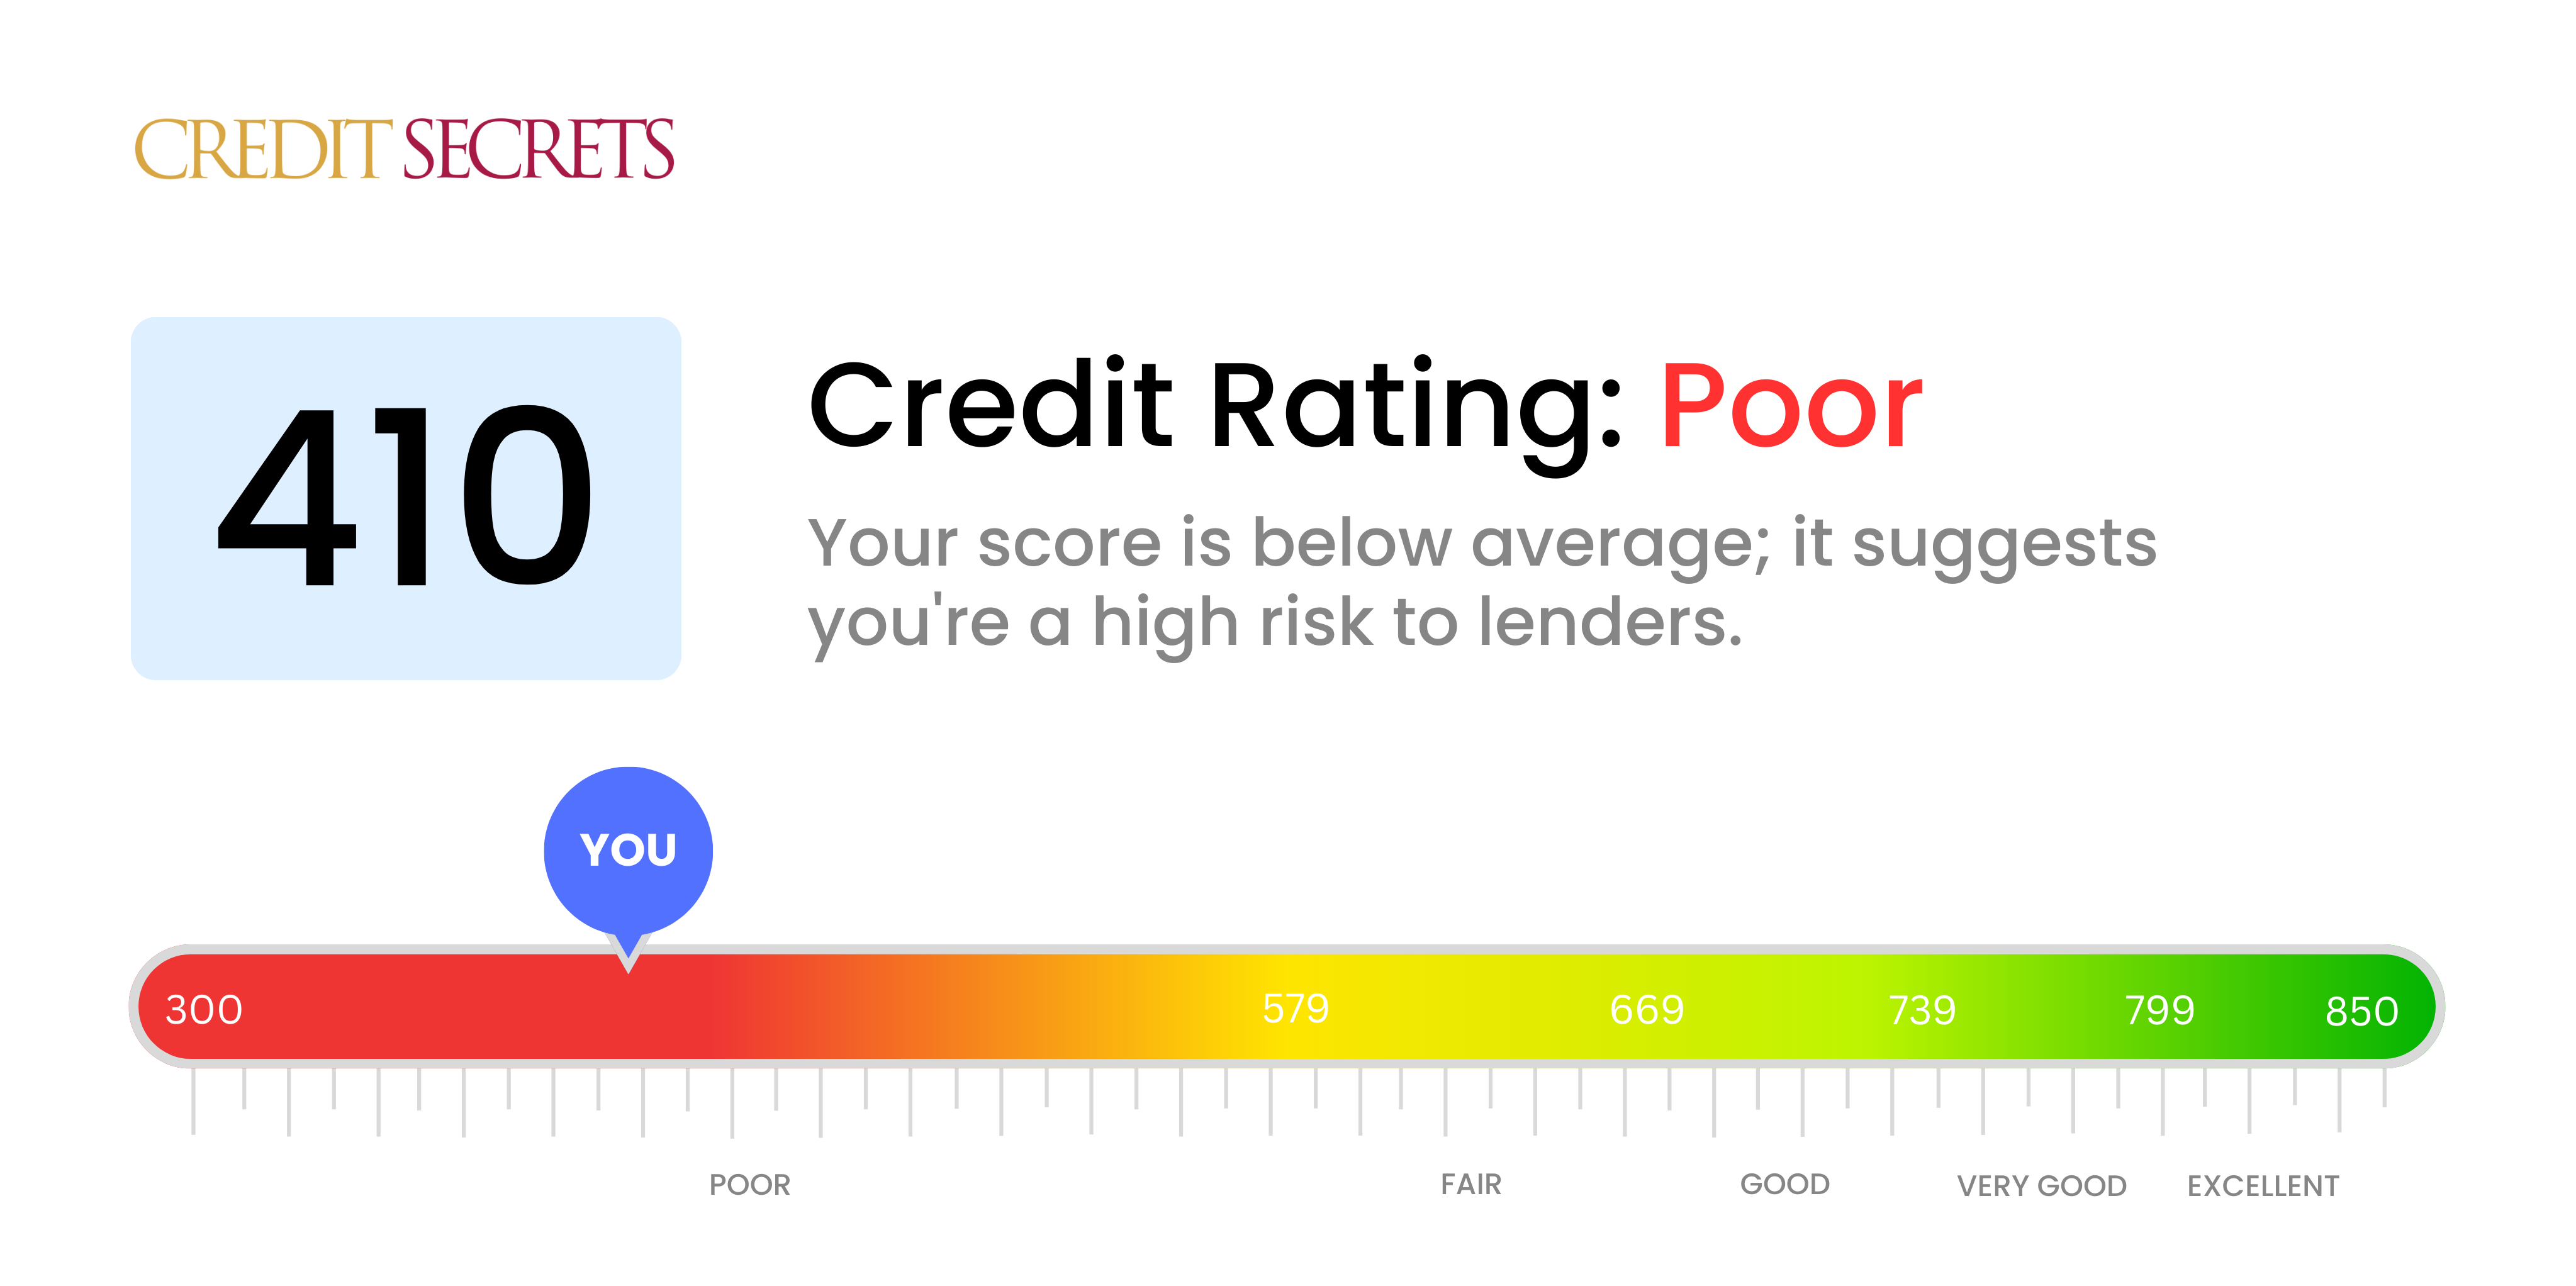 Is 410 a good credit score?